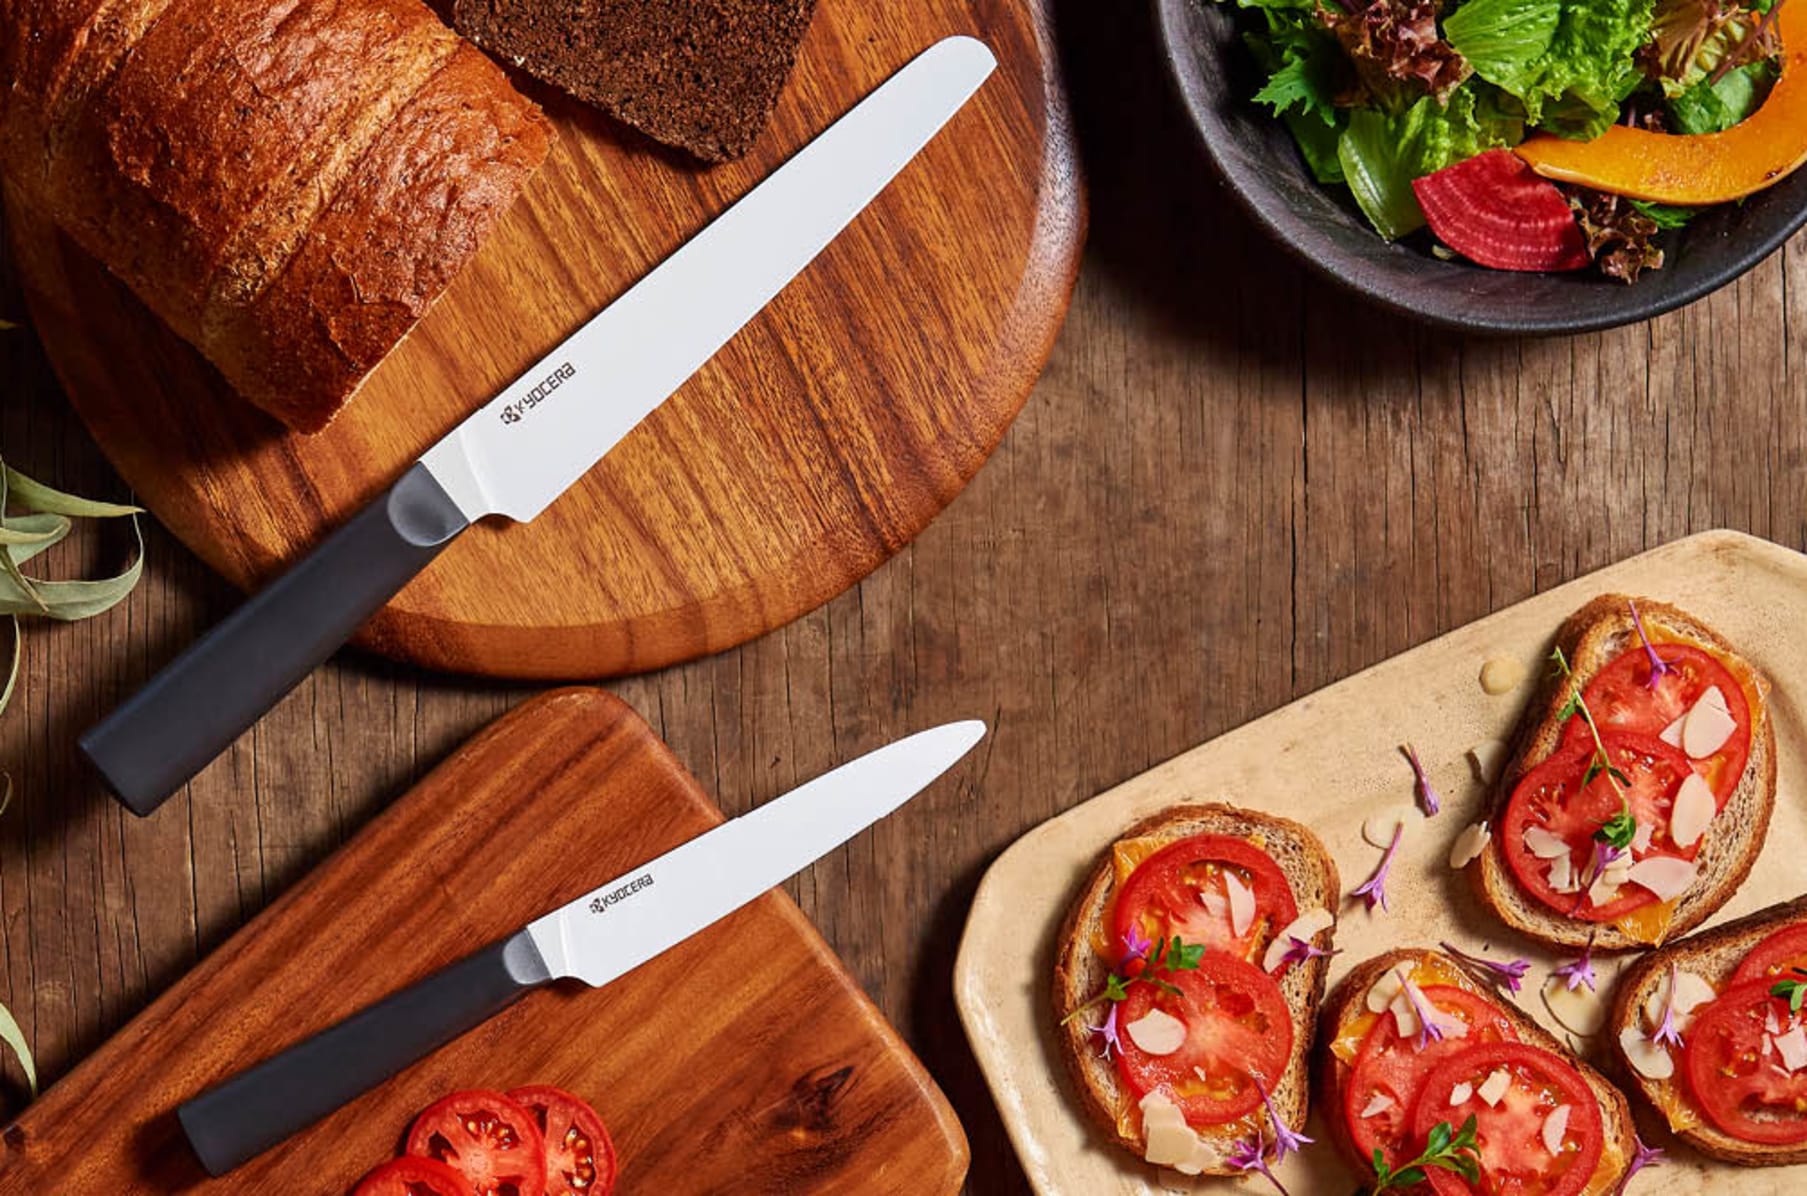 KYOCERA > Kyocera INNOVATION white ceramic kitchen knives: Sharp,  innovative, lightweight, and noncorrosive for mindful, healthy cooking.